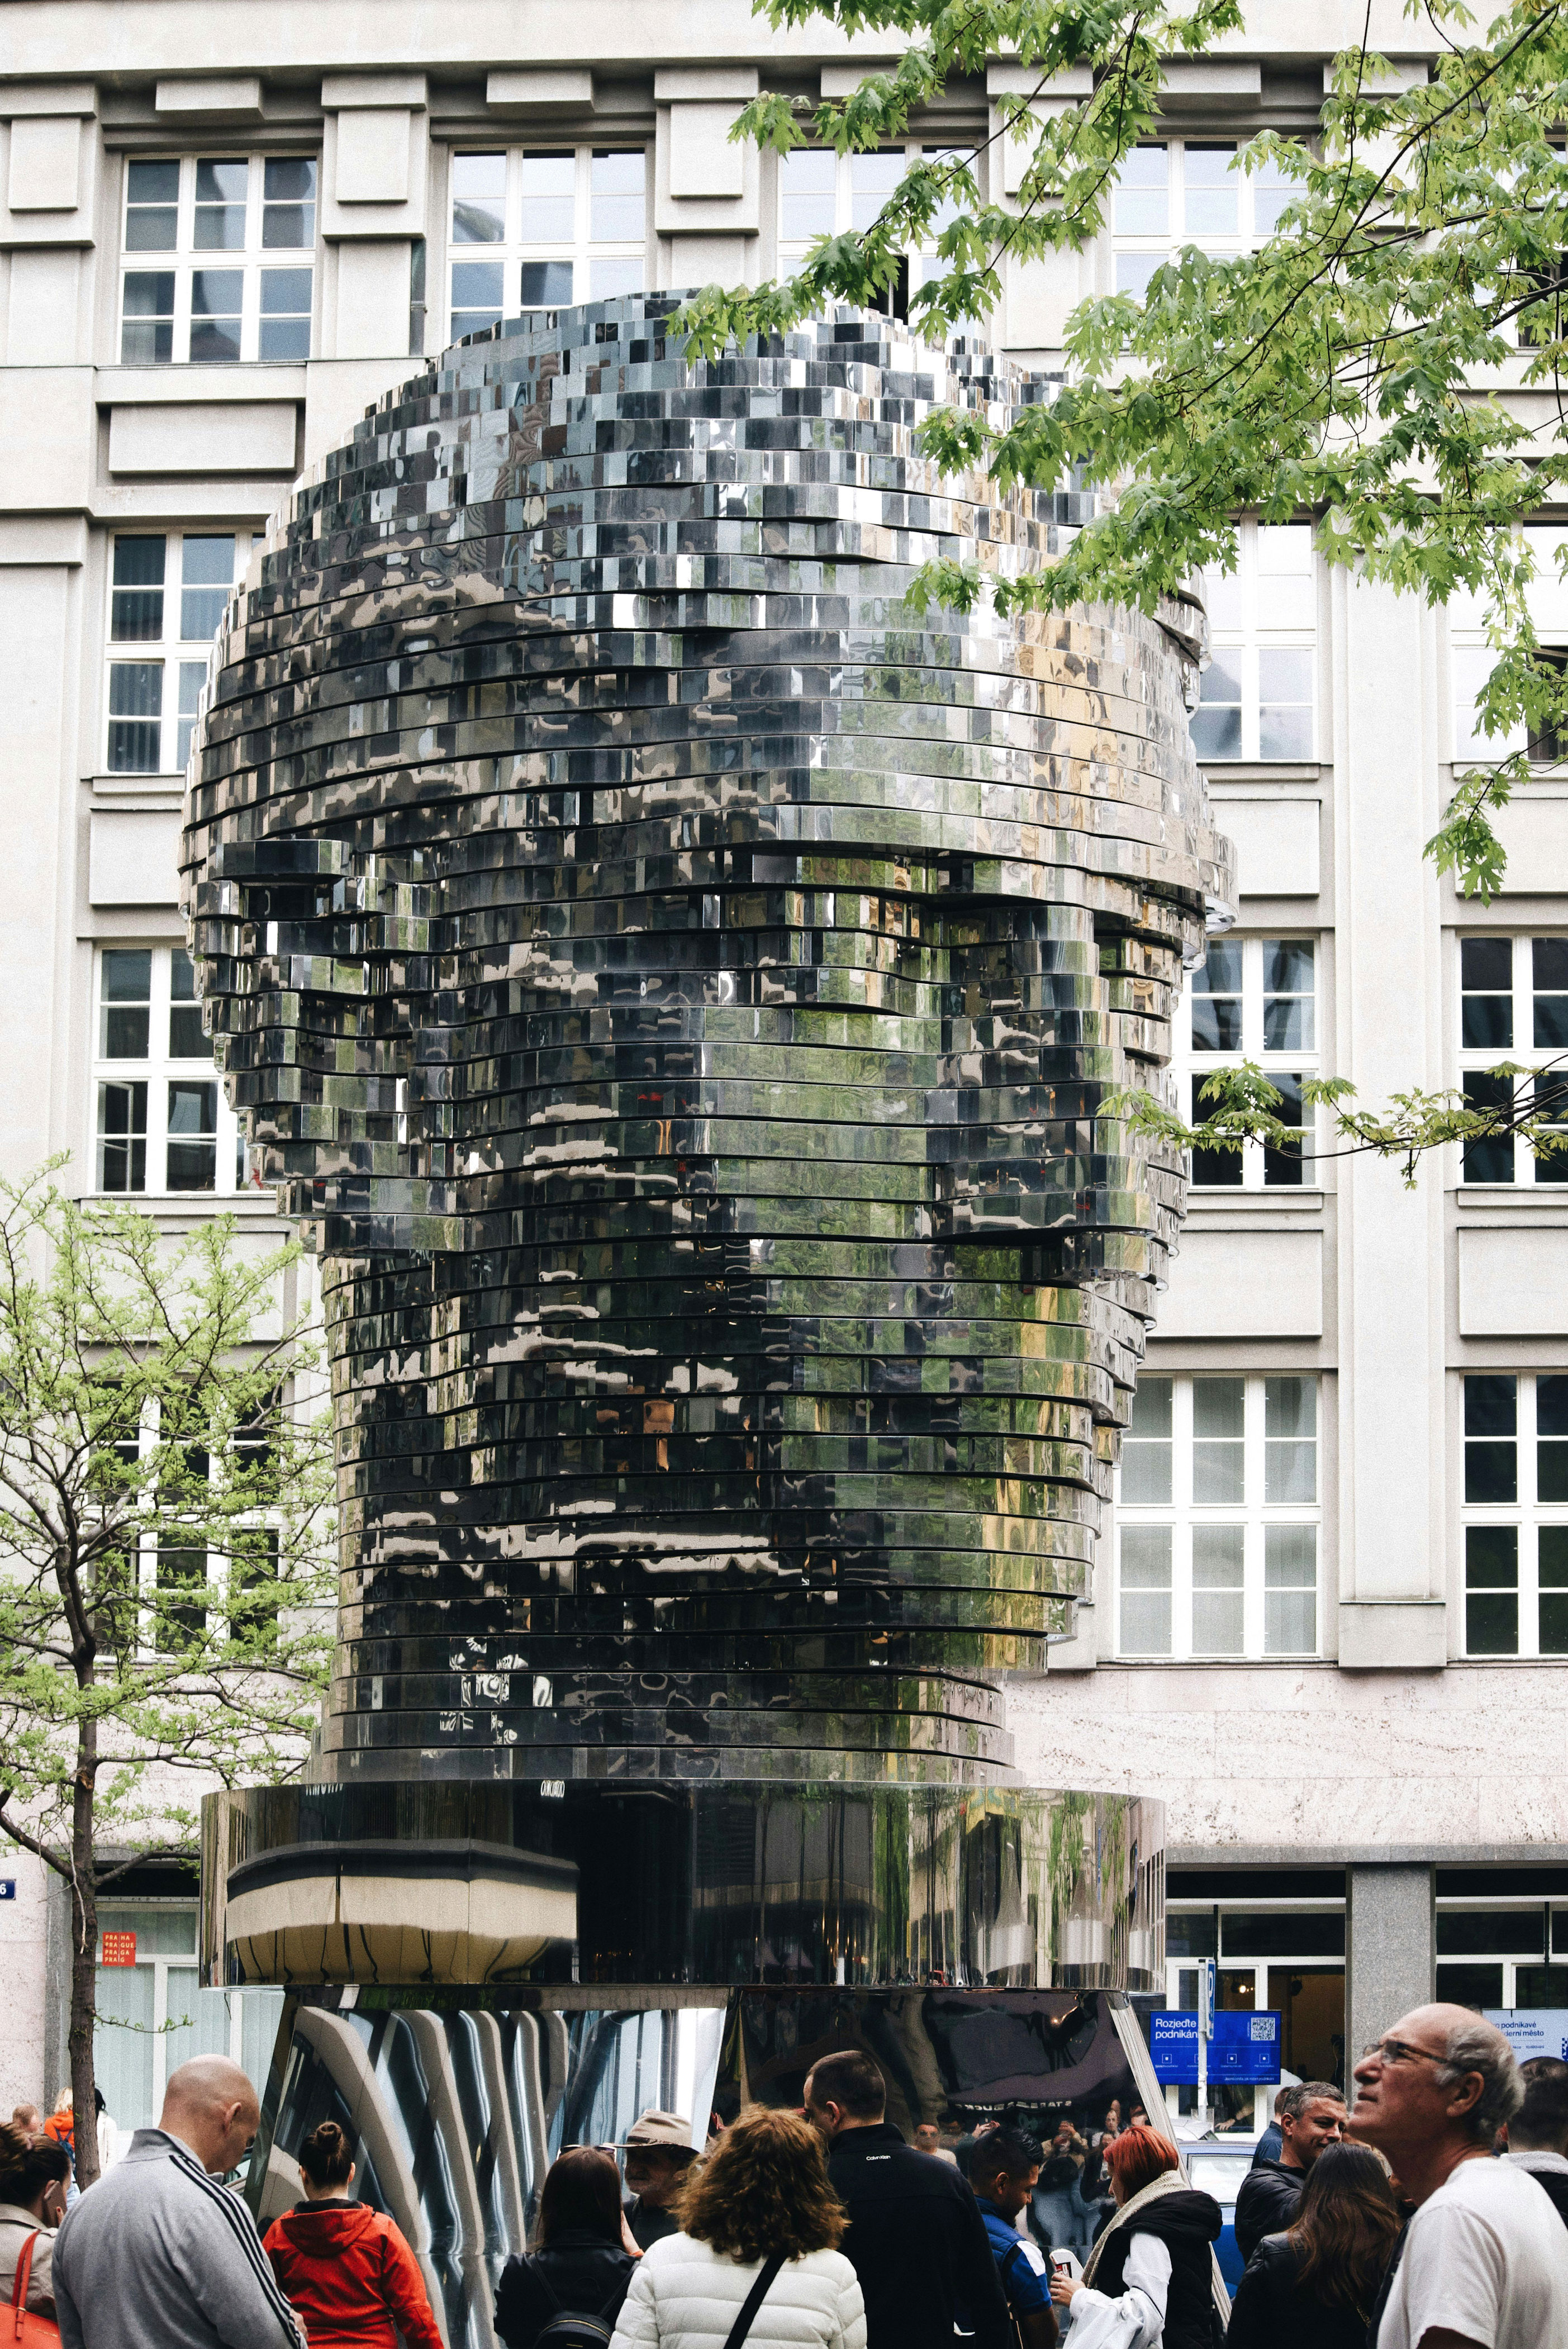 <p>This year marks the 100th anniversary of Franz Kafka’s death, and his birth city is honoring the iconic novelist with special events throughout the year. There have been plenty of exciting Kafkaesque surprises around town already, including the re-unveiling of David Černý’s famous <a href="https://www.instagram.com/cityofprague/p/C5a_DGpqdMO/"><em>Head of Franz Kafka</em> sculpture</a> in April, which was disassembled towards the end of 2023 for renovations but now stands spinning once more. There is also a <a href="https://www.instagram.com/reel/C5isdkSpDF4/">commemorative tram</a> running through <a href="https://www.cntraveler.com/gallery/best-things-to-do-in-prague?mbid=synd_msn_rss&utm_source=msn&utm_medium=syndication">Prague</a> covered in illustrations and thought-provoking quotes from the writer.</p> <p>The celebrations will hit peak buzz in June—the exact month of Kafka’s death—with readings and exhibits at the <a href="https://www.cntraveler.com/galleries/2014-09-02/10-of-the-worlds-most-beautiful-libraries?mbid=synd_msn_rss&utm_source=msn&utm_medium=syndication">Municipal Library of Prague</a>, a cabaret performance at Na Zabradli Theatre titled <em>Kafka Has Left the Building</em>, and even a Kafka-themed dance recital from the Prague Chamber Ballet. And when you need a break from waxing philosophical, we suggest retreating to the recently reimagined, decidedly contemporary <a href="https://cna.st/affiliate-link/vVKyJ2z2zbjdfuLTC2dVn9S9FTpp4HhCNJarZmGJzh1uzFm5L7Ypz1giADMzYHk8JtjX8FqAWouB5hPmgUqtmHUF1xLdwKS4taspPWwFAMCTJCWTzyeAdq2YqtSq6t1GwrHY98VcRCX89pkK4TT6zyExE3Cixq7c1WqMDHzT7rC7dA6M9QBdWC5D4FS7Gt8BzACg6bh" rel="sponsored">Almanac X Alcron Prague</a> hotel.</p><p>Sign up to receive the latest news, expert tips, and inspiration on all things travel</p><a href="https://www.cntraveler.com/newsletter/the-daily?sourceCode=msnsend">Inspire Me</a>